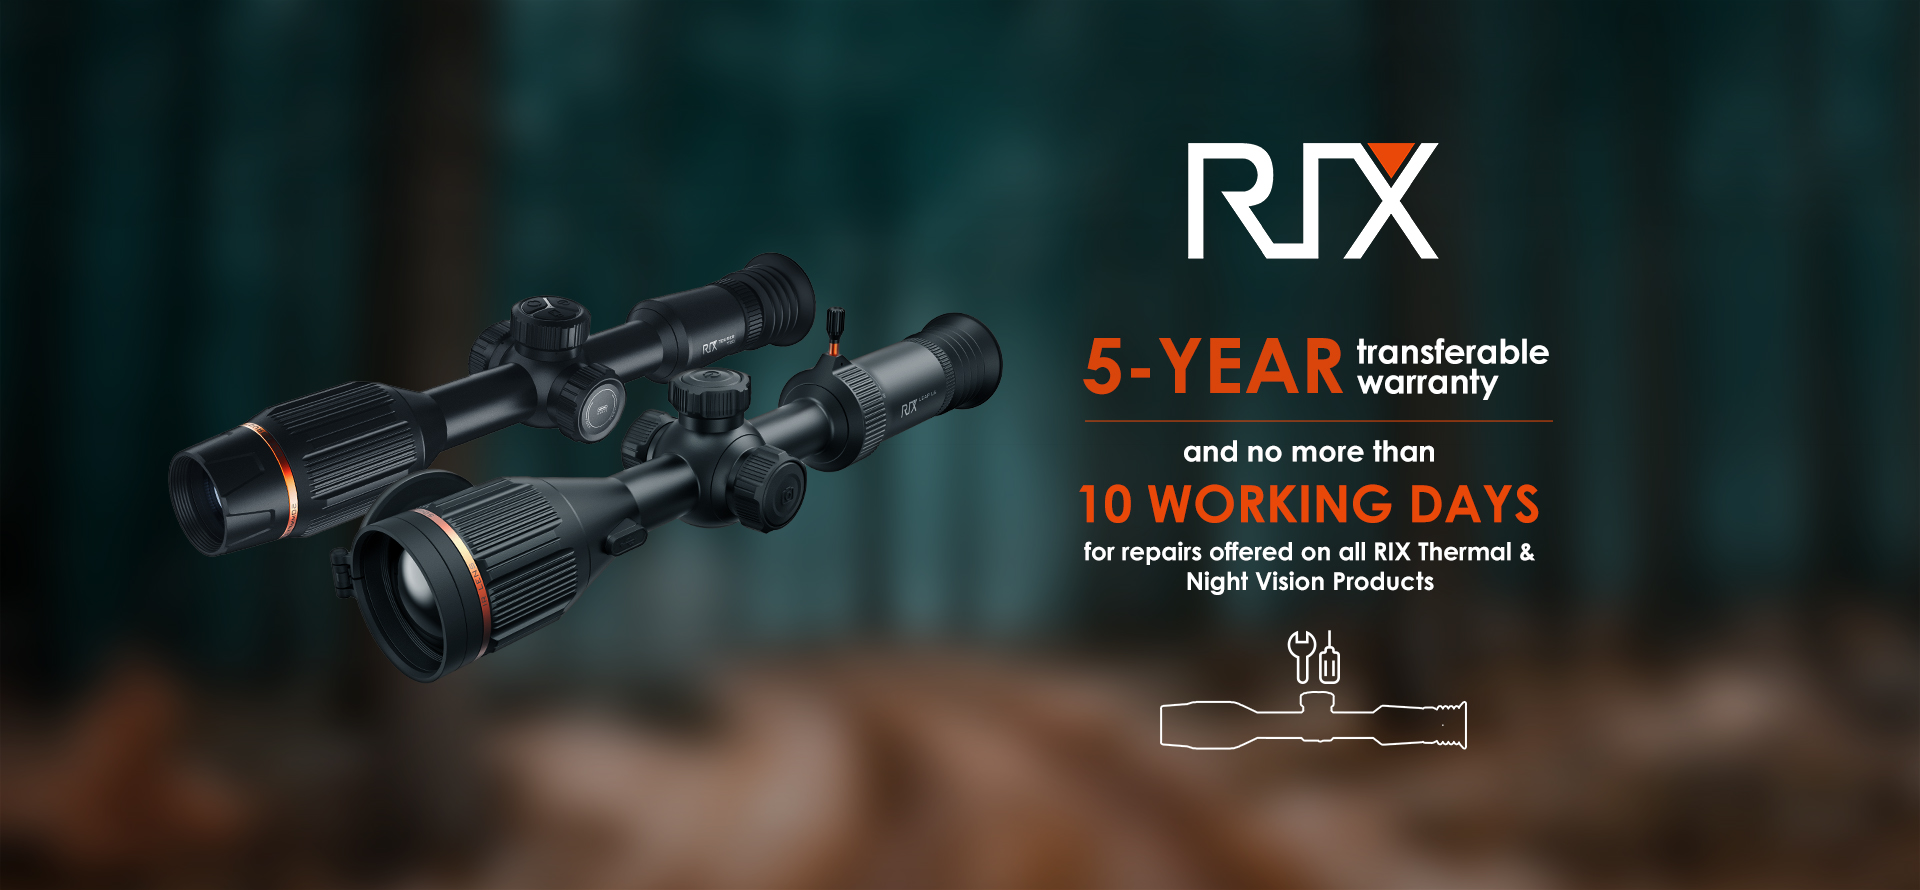 RIX Thermal & Night Vision Products